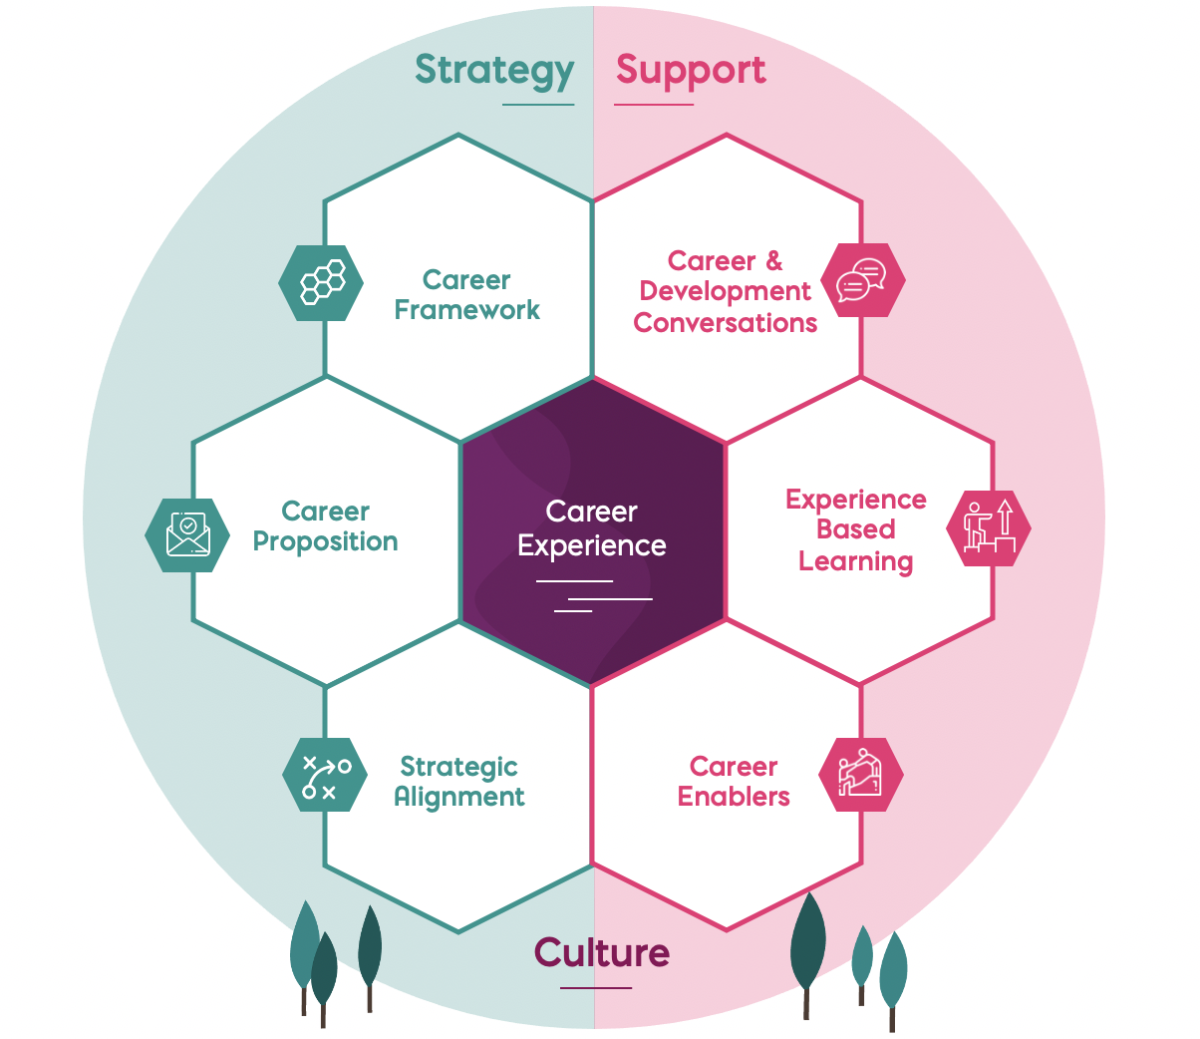 Illustration of Career Strategy & Support Model